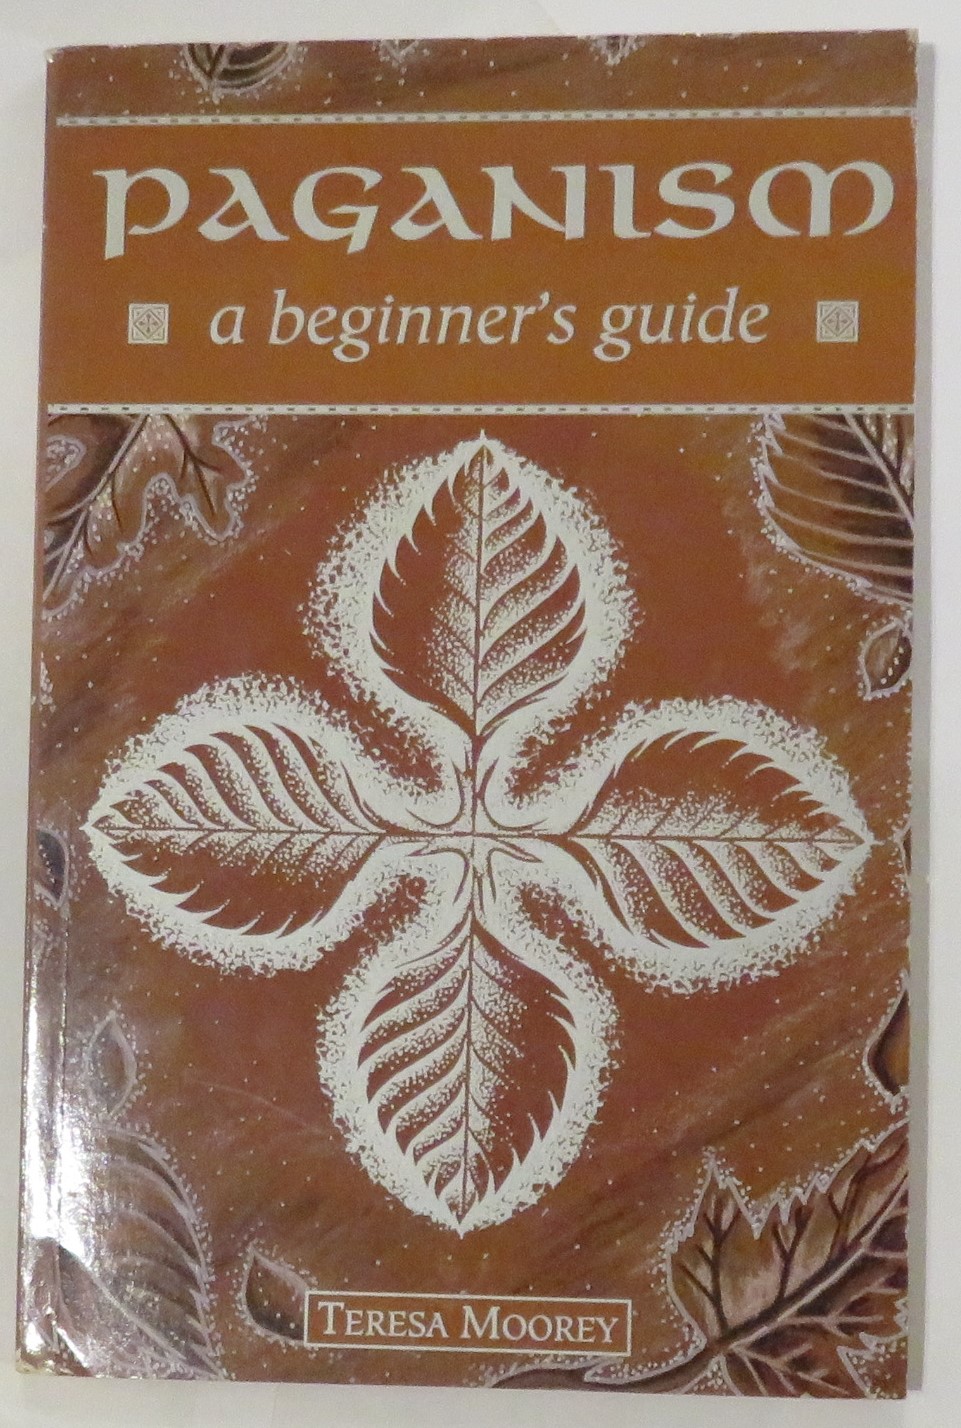 Paganism: a beginner's guide